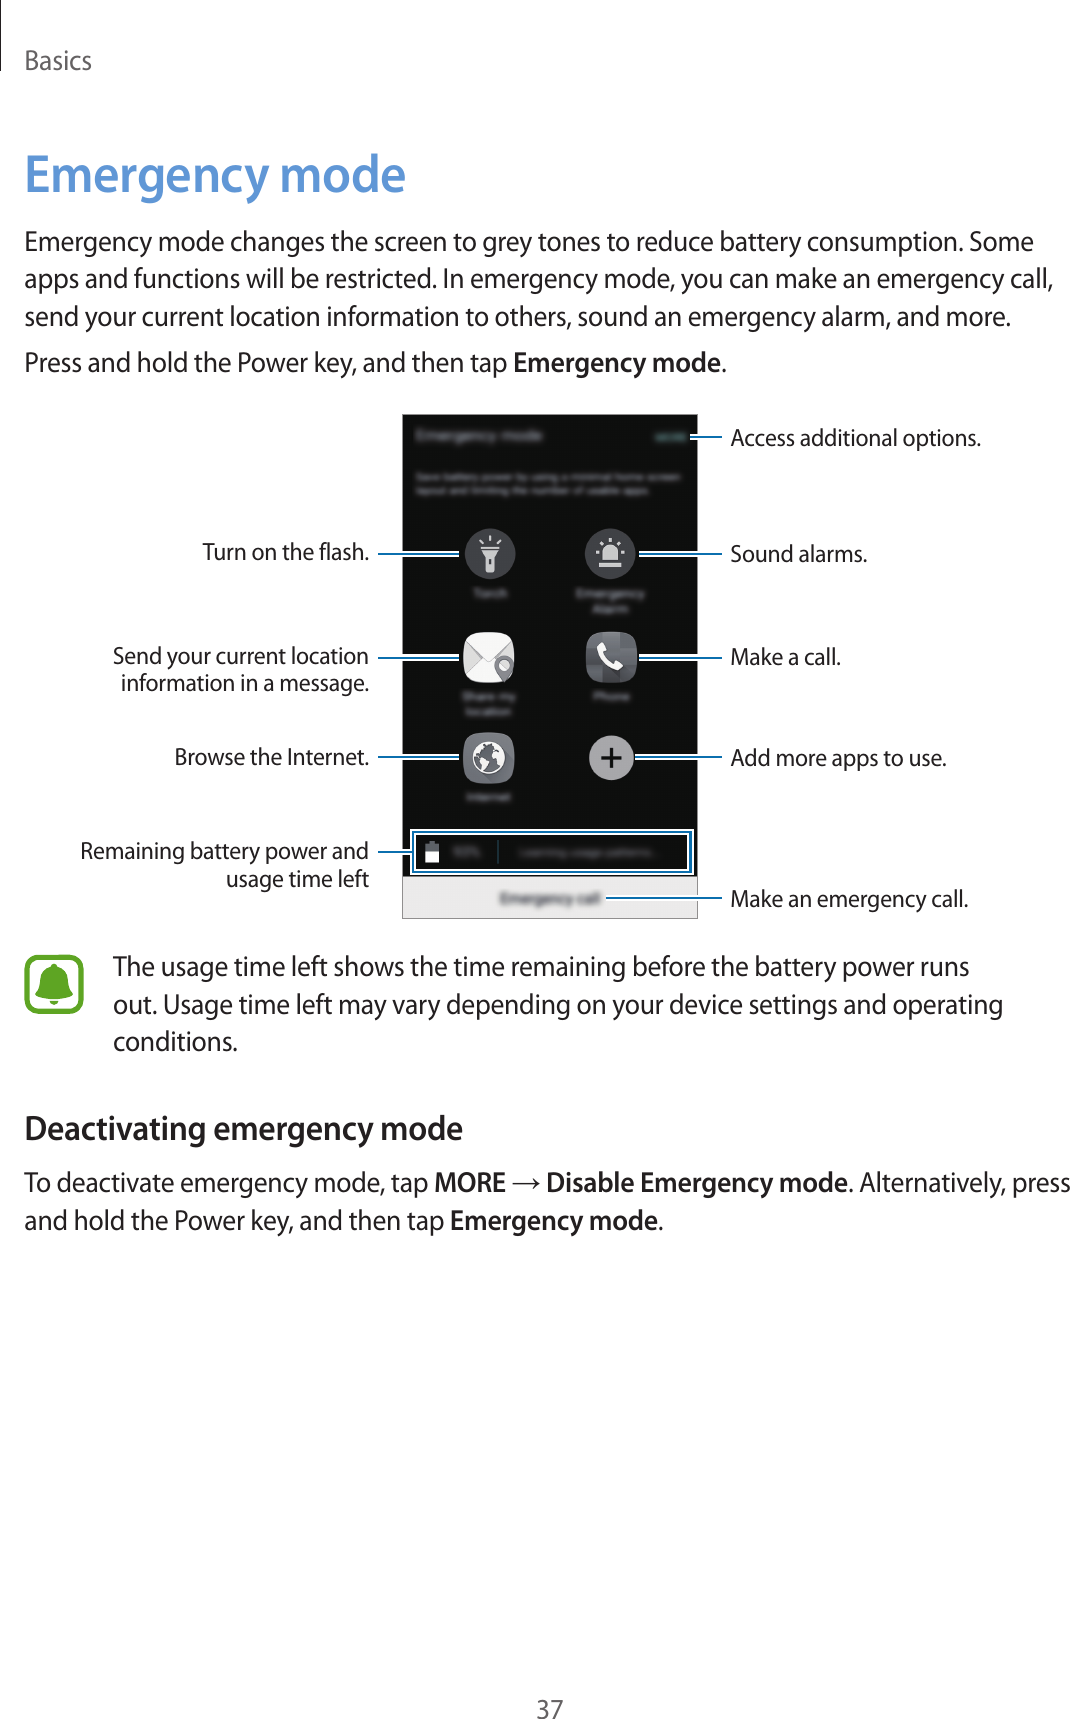 Basics37Emergency modeEmergency mode changes the screen to grey tones to reduce battery consumption. Some apps and functions will be restricted. In emergency mode, you can make an emergency call, send your current location information to others, sound an emergency alarm, and more.Press and hold the Power key, and then tap Emergency mode.Sound alarms.Add more apps to use.Make an emergency call.Remaining battery power and usage time leftTurn on the flash.Make a call.Send your current location information in a message.Browse the Internet.Access additional options.The usage time left shows the time remaining before the battery power runs out. Usage time left may vary depending on your device settings and operating conditions.Deactivating emergency modeTo deactivate emergency mode, tap MORE → Disable Emergency mode. Alternatively, press and hold the Power key, and then tap Emergency mode.